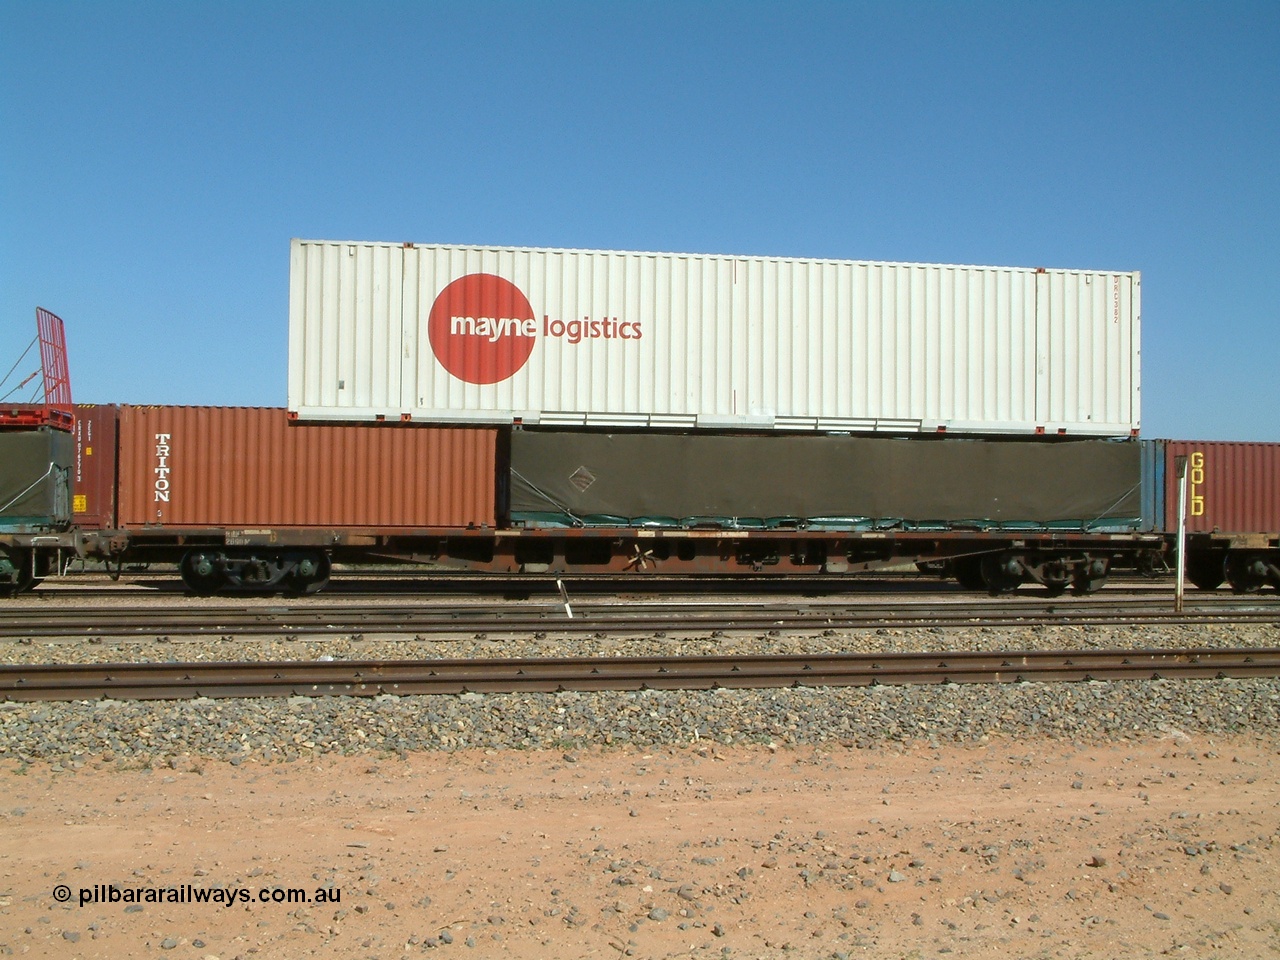 030404 104048
Port Augusta Spencer Junction yard, RQKY type 60' container flat waggon fitted with aligned bogies RQKY 2690 was originally built by Perry Engineering SA in 1974 in a batch of forty five RM type container waggon, fitted with aligned bogies and recoded to AQPY type. Seen here with a Mayne Logistics 48' DRC 382 container on top of a 40' half height tarped load. 4th April 2003.
Keywords: RQKY-type;RQKY2690;Perry-Engineering-SA;RM-type;AQPY-type;AQMP-type;